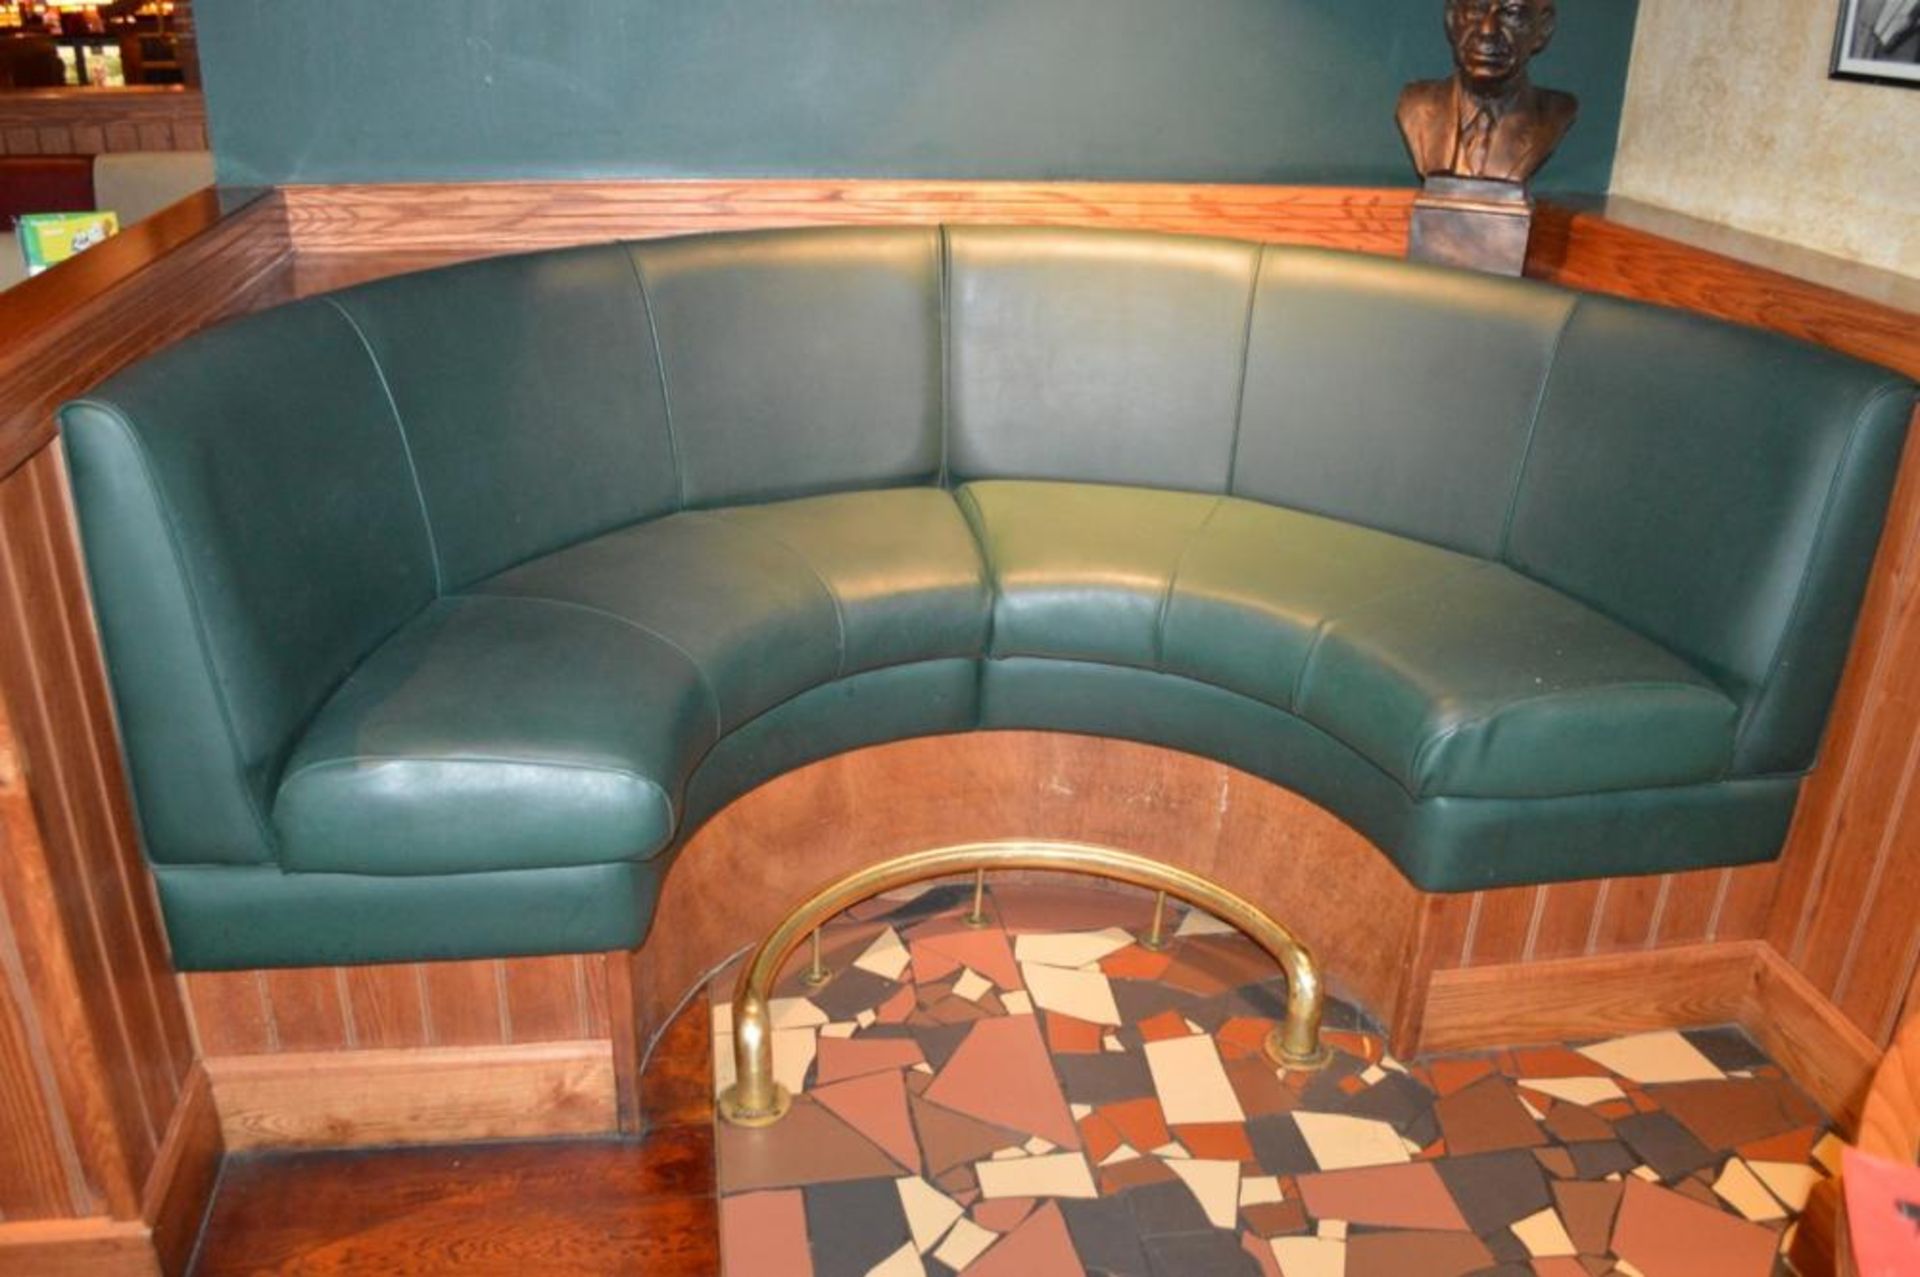 1 x Contemporary U Seating Booth With Green Faux Leather Upholstery and Brass Foot Rest - H105 x W22